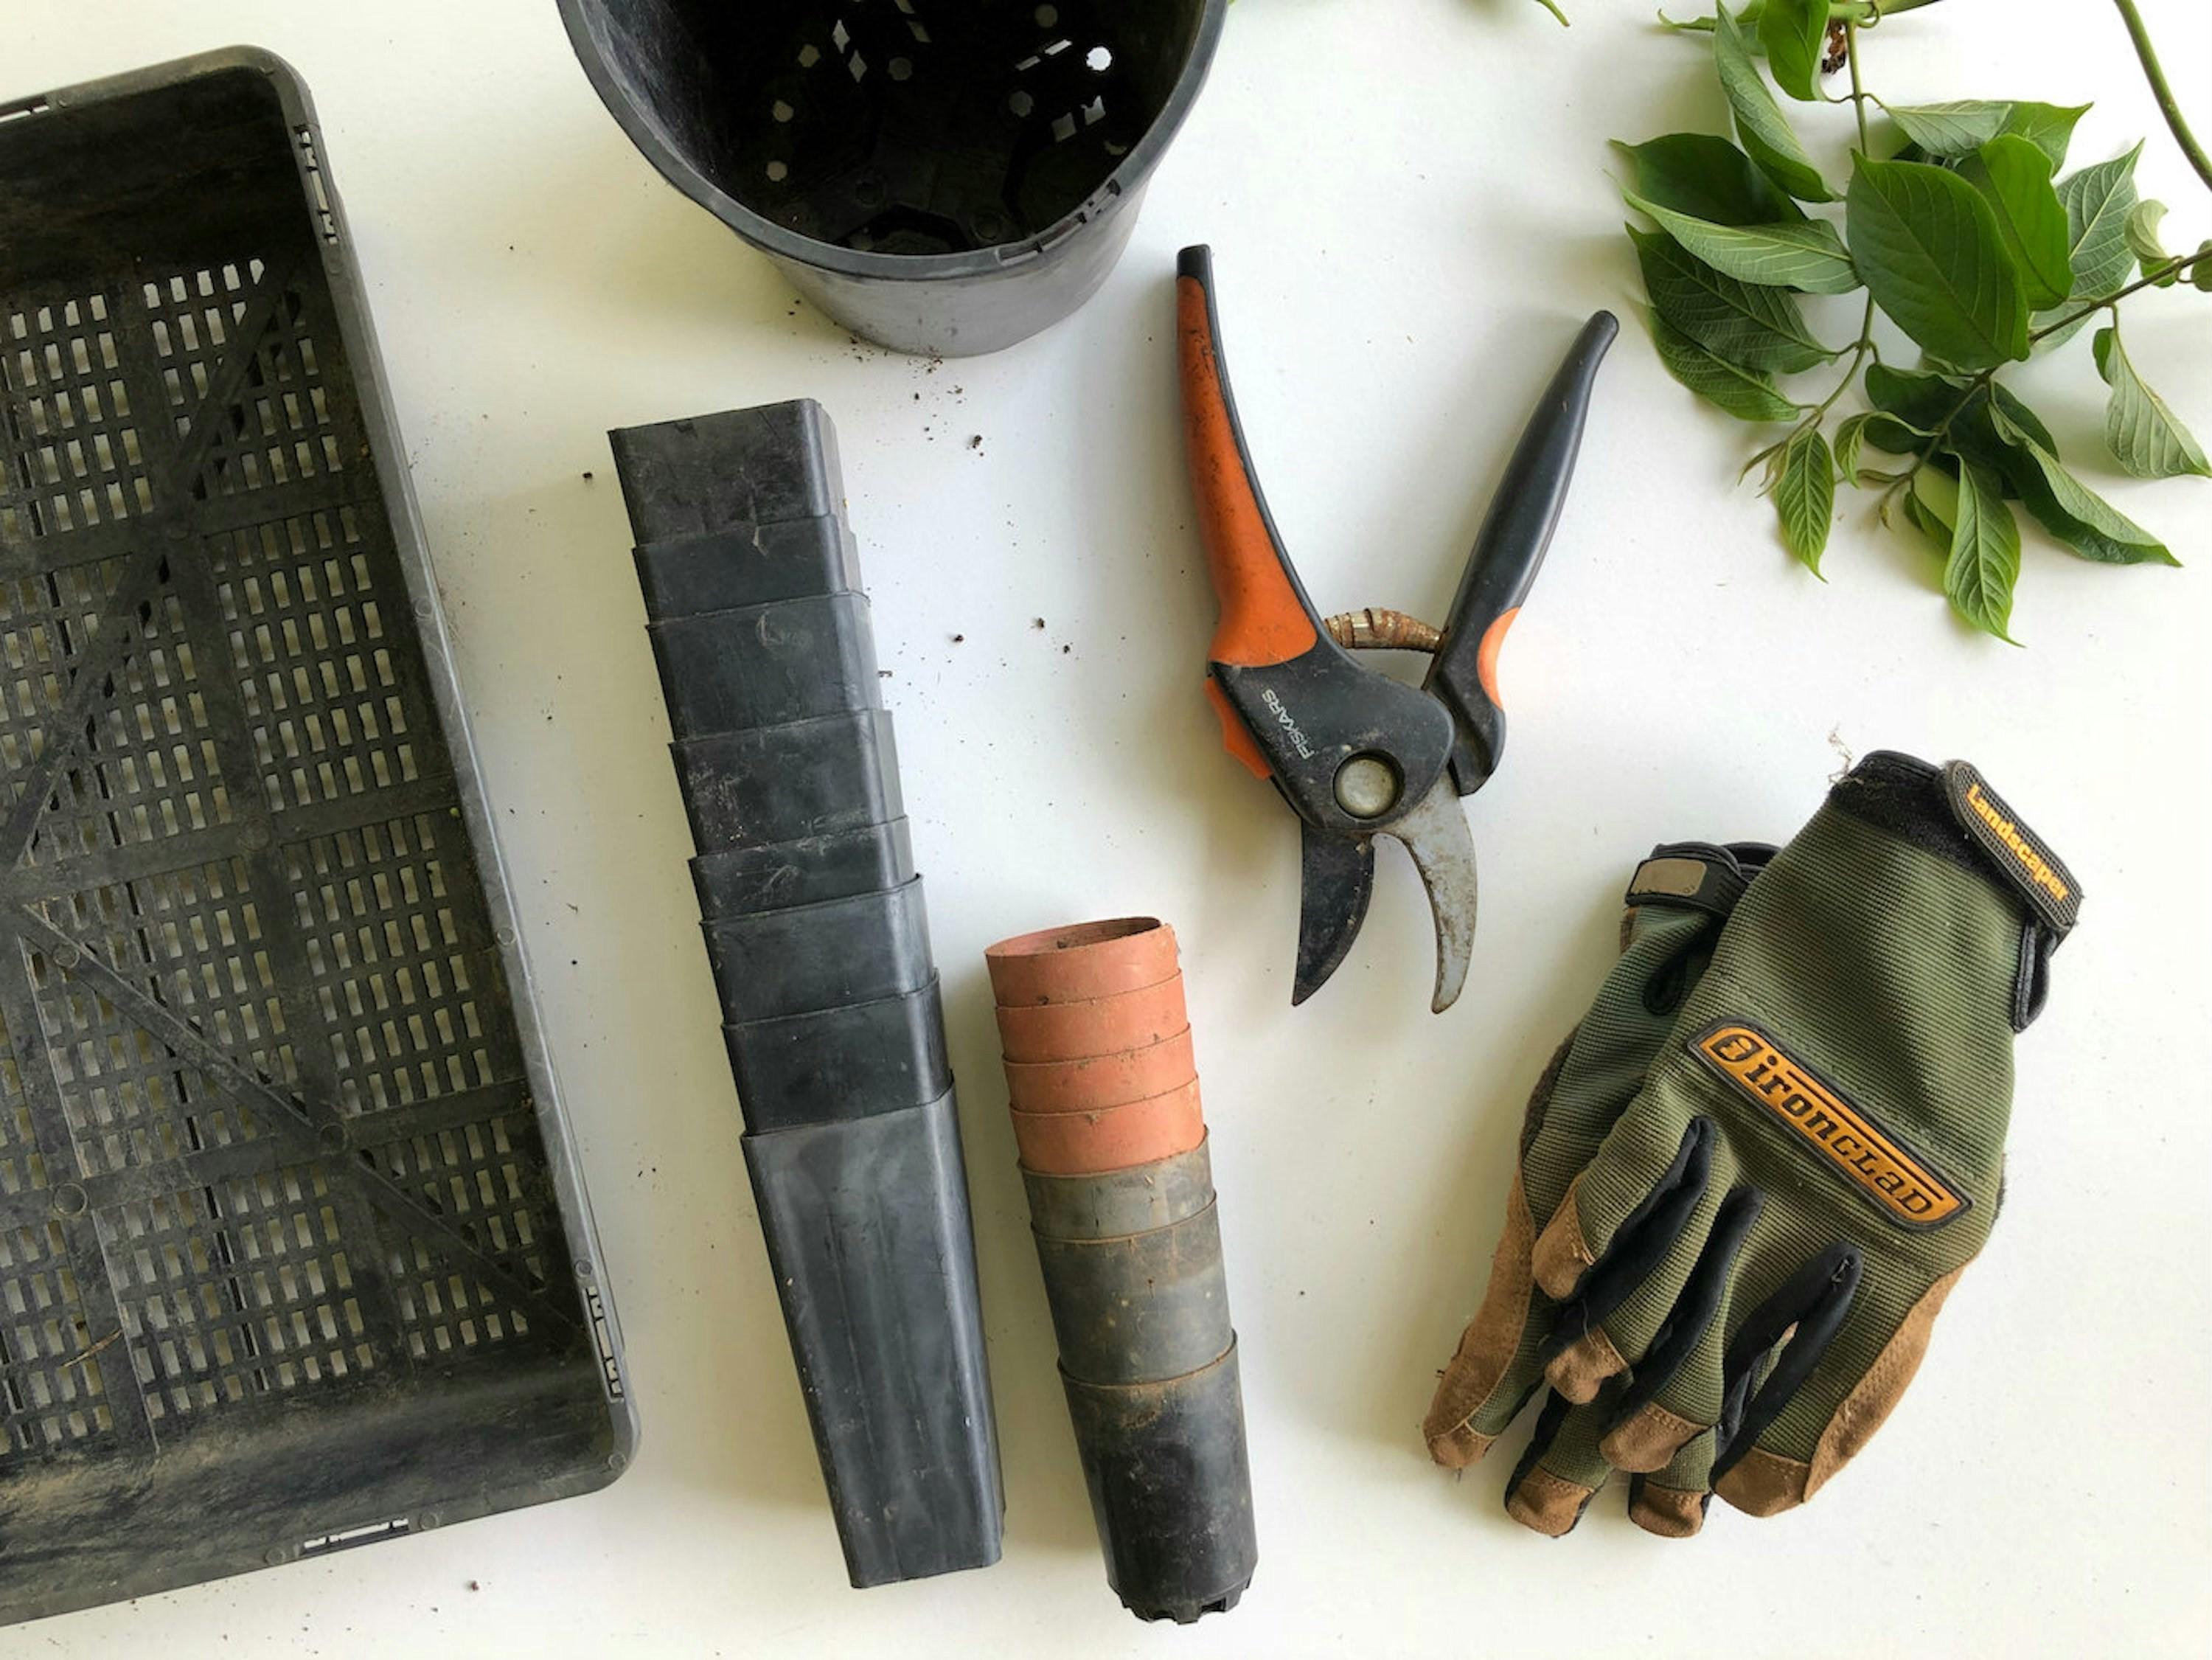 Various gardening objects arranged on a white background, including pots of various sizes, a black plastic tray, garden snips, garden gloves and some leaves.